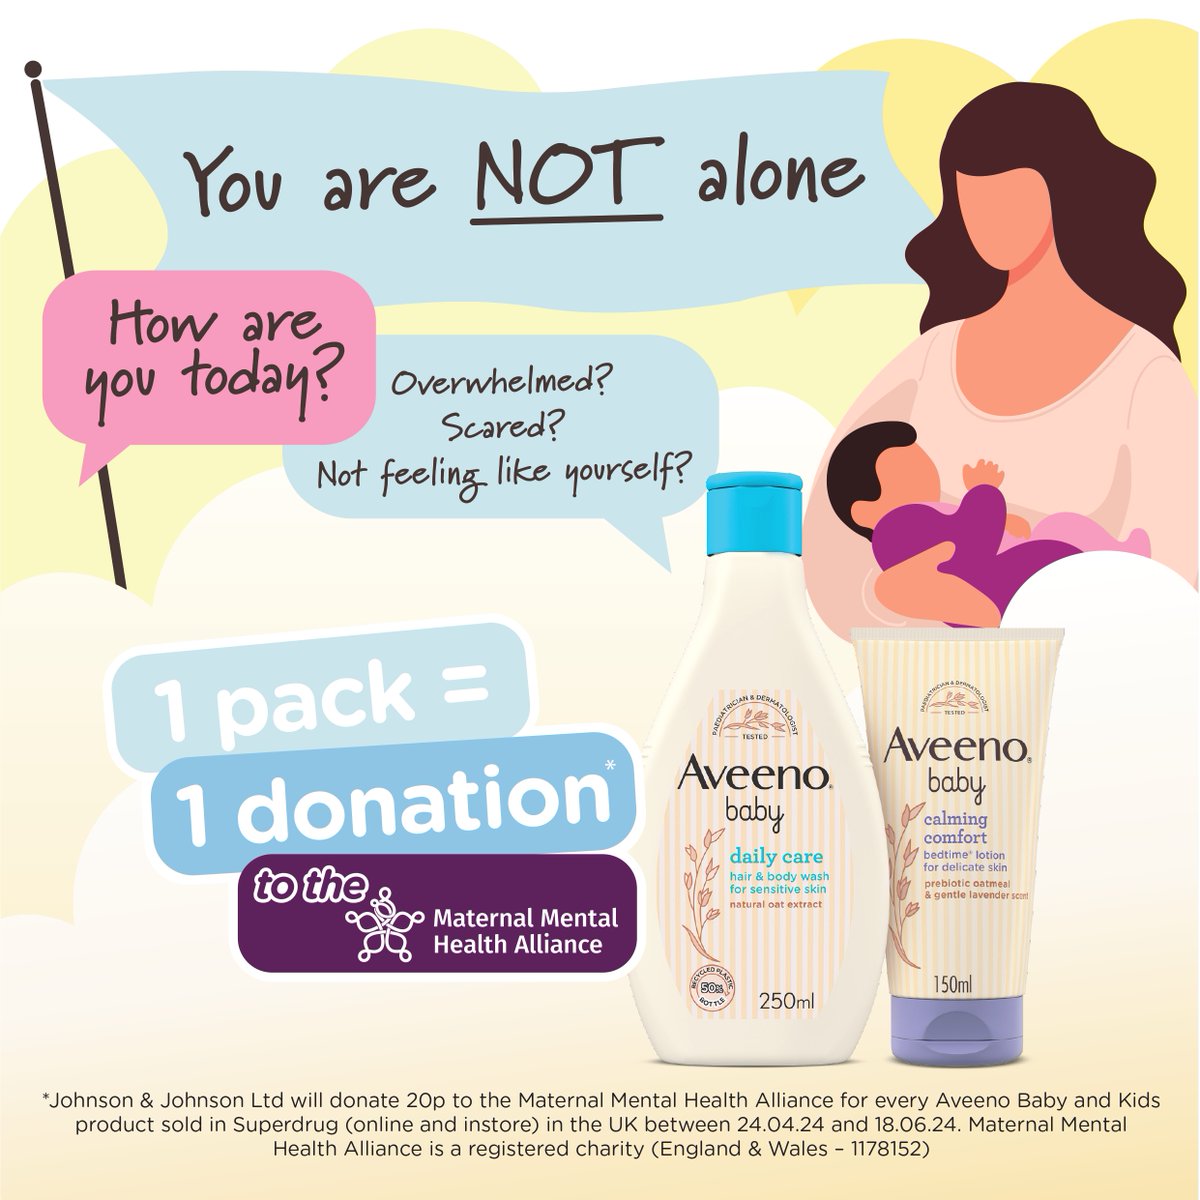 We are thrilled to be working with Aveeno Baby to let parents know it’s OK to talk about their mental health. Together, we want to bring #PerinatalMentalHealth out of hiding and see parents get the right support for them: maternalmentalhealthalliance.org/aveeno-baby #ConversationsMatter #MMHAW24